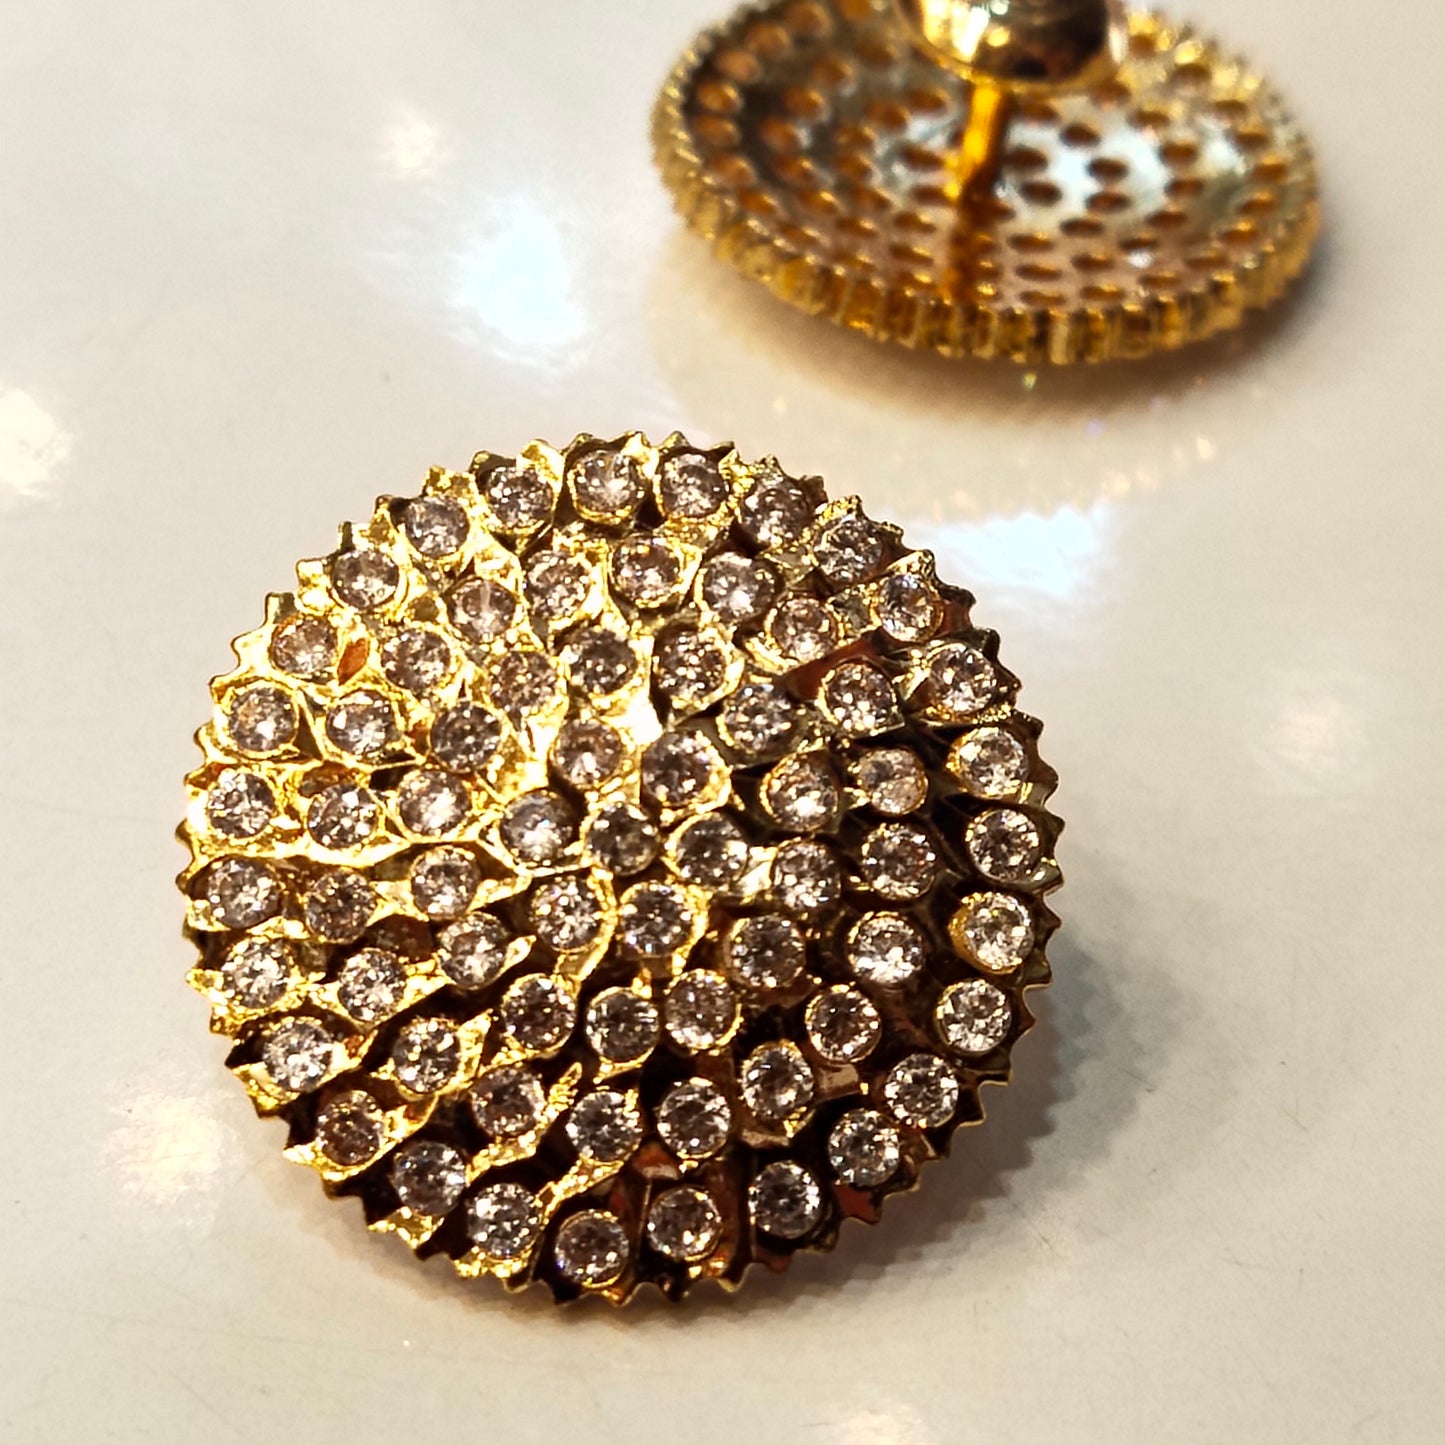 "Gorgeous Gatti Cheta Work: Elevate Your Style with 24 K Gold Plated Big Size Kammalu Earrings by Asp Fashion Jewellery"